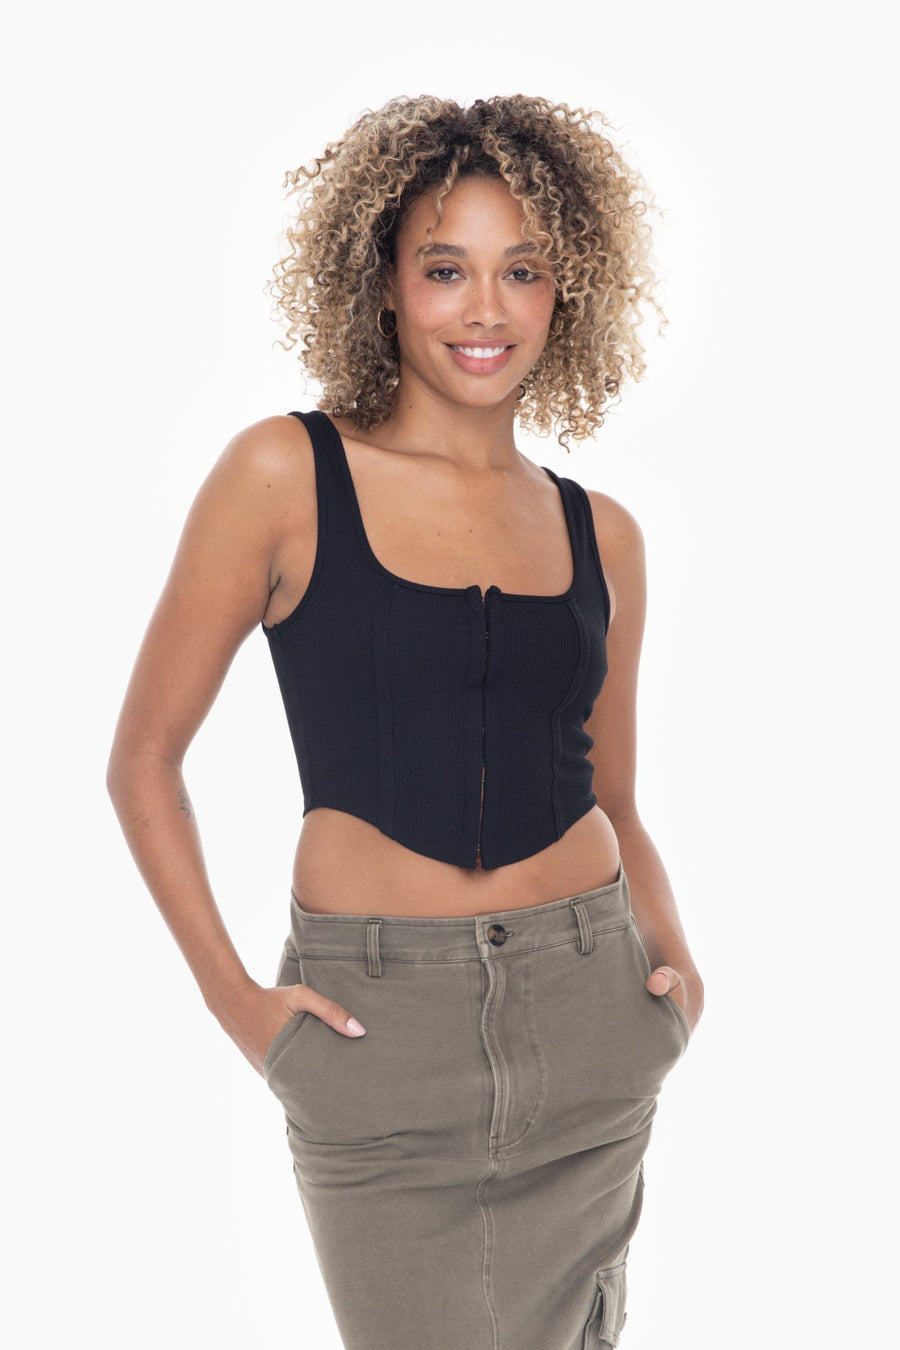 Featuring a ribbed tank top with clasps down the front in the color black 